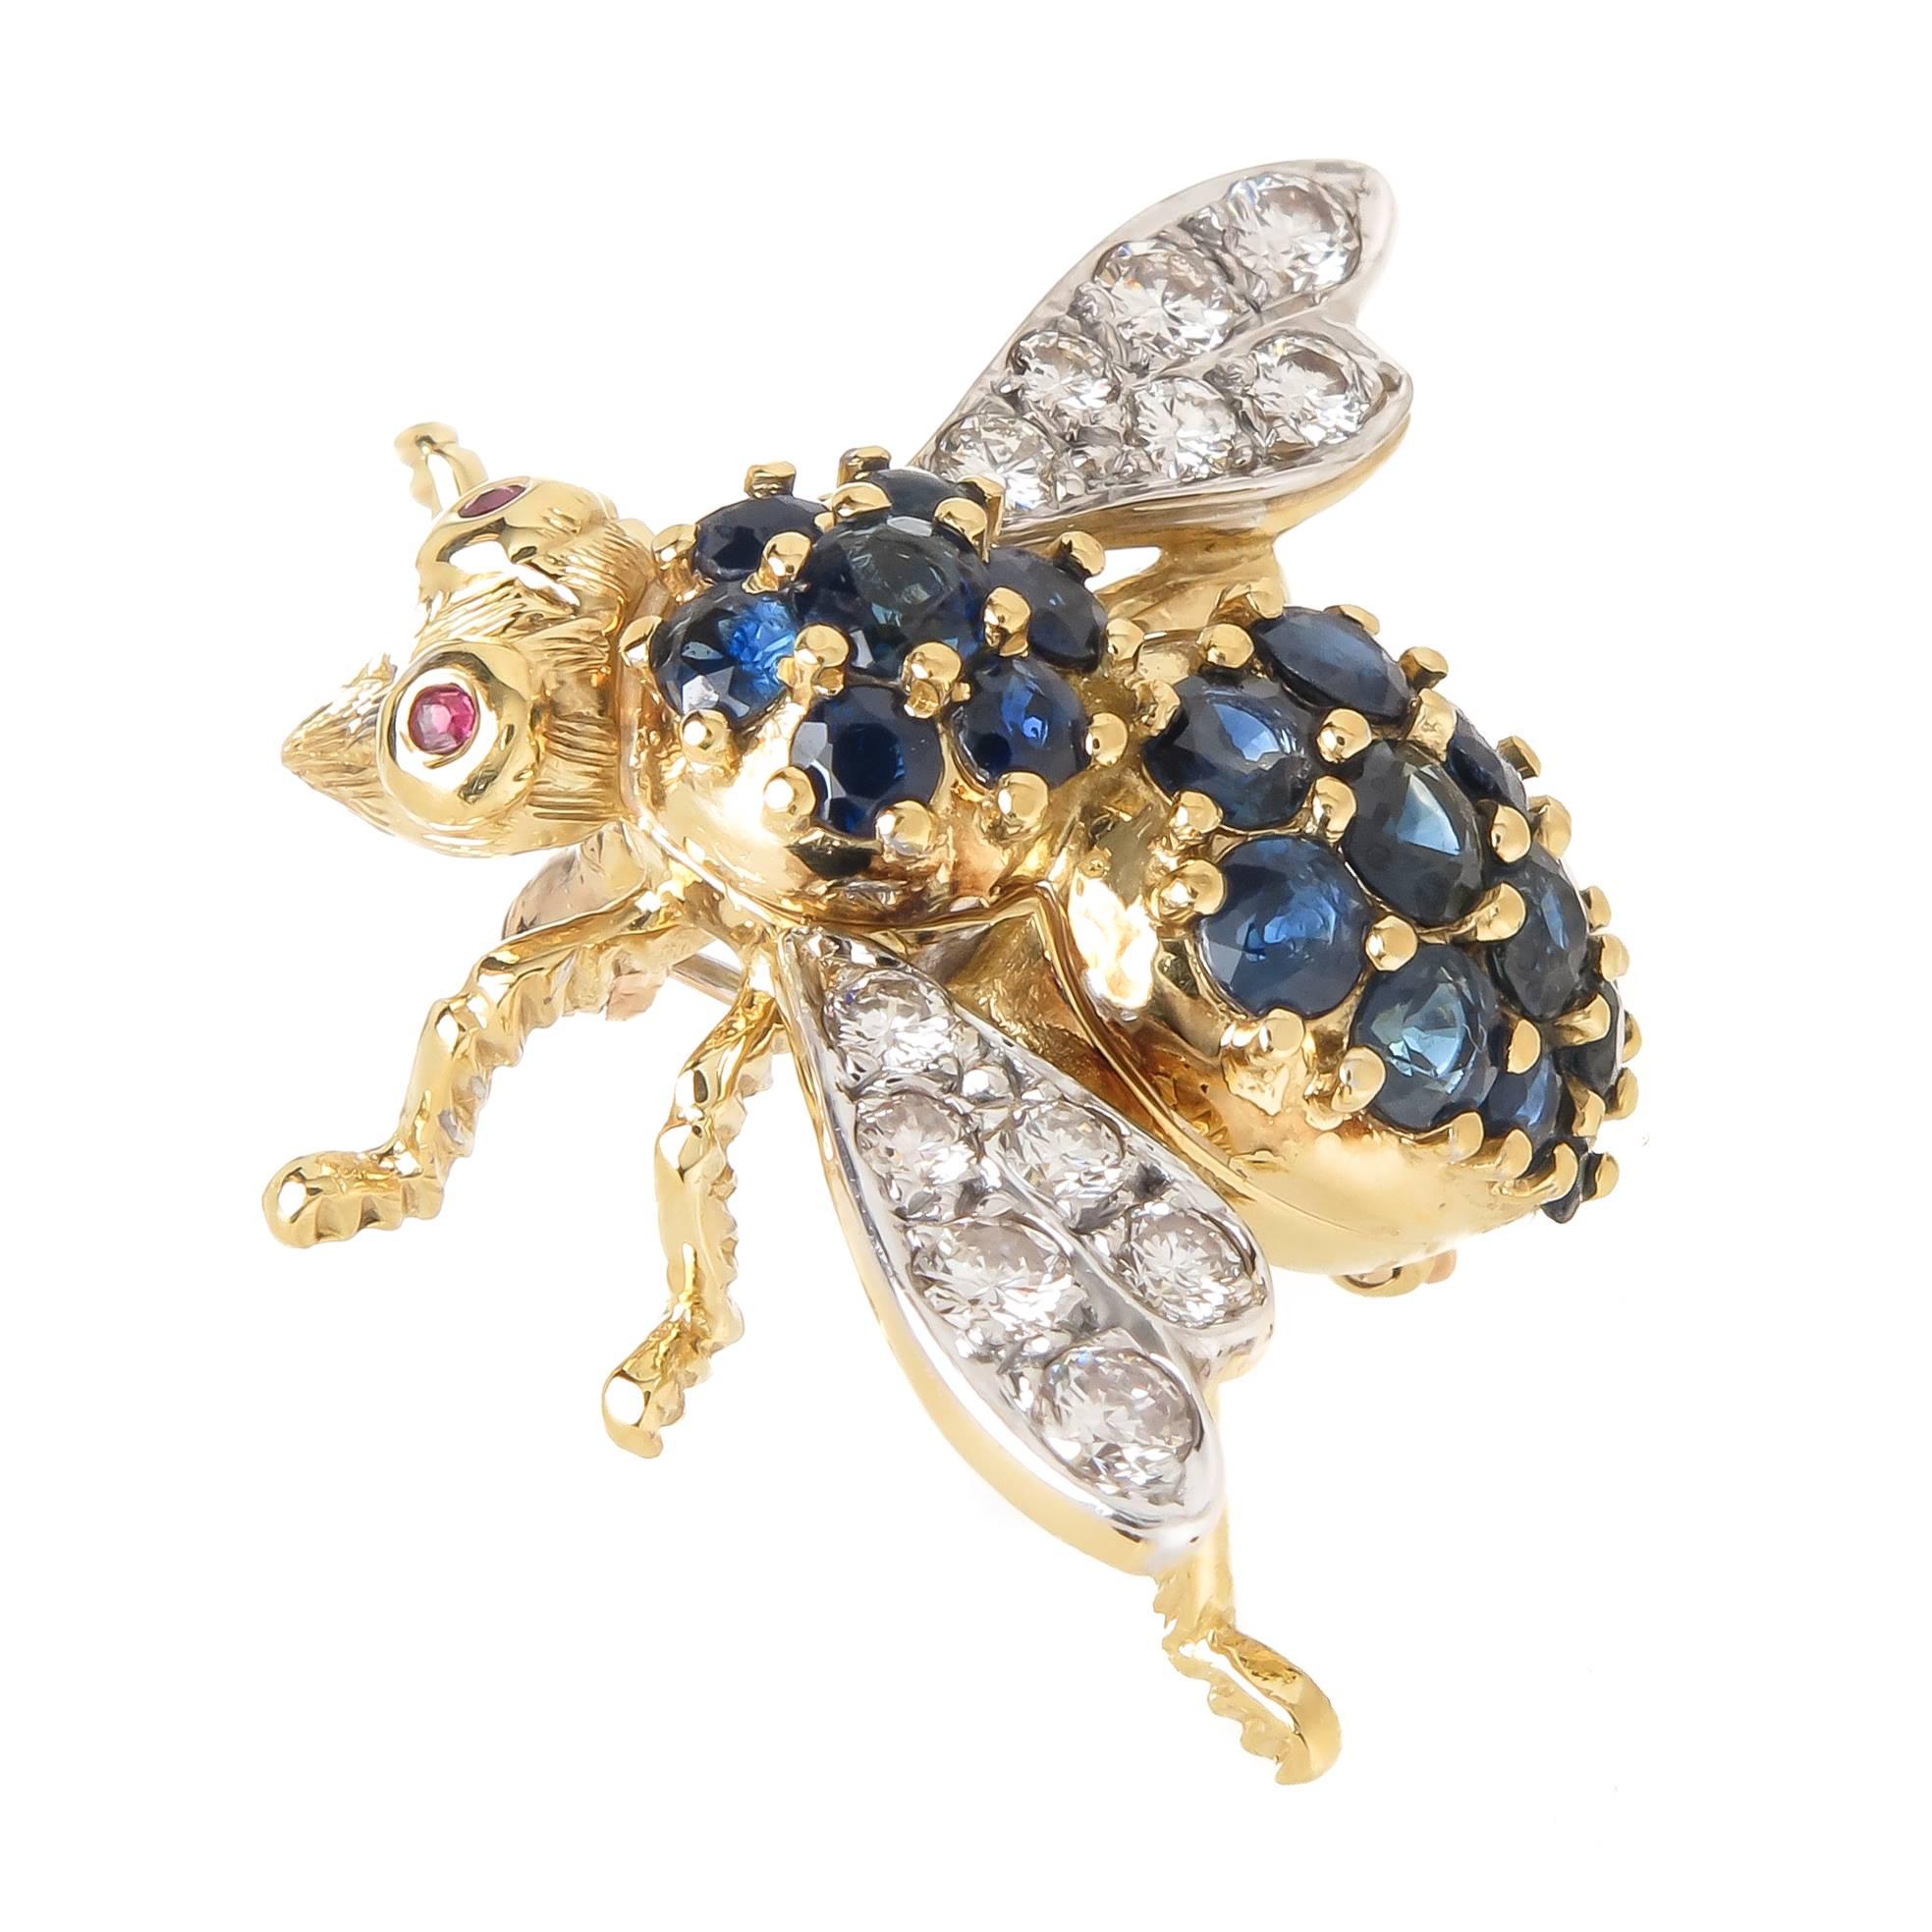 Circa 1980s Herbert Rosenthal 18K yellow Gold Bee Brooch, measuring 1 inch in length and 1 1/4 inch wing tip to tip, set with Fine White round Brilliant cut Diamonds totaling .75 Carat and further set with Sapphires and Rubies for the Eyes. 